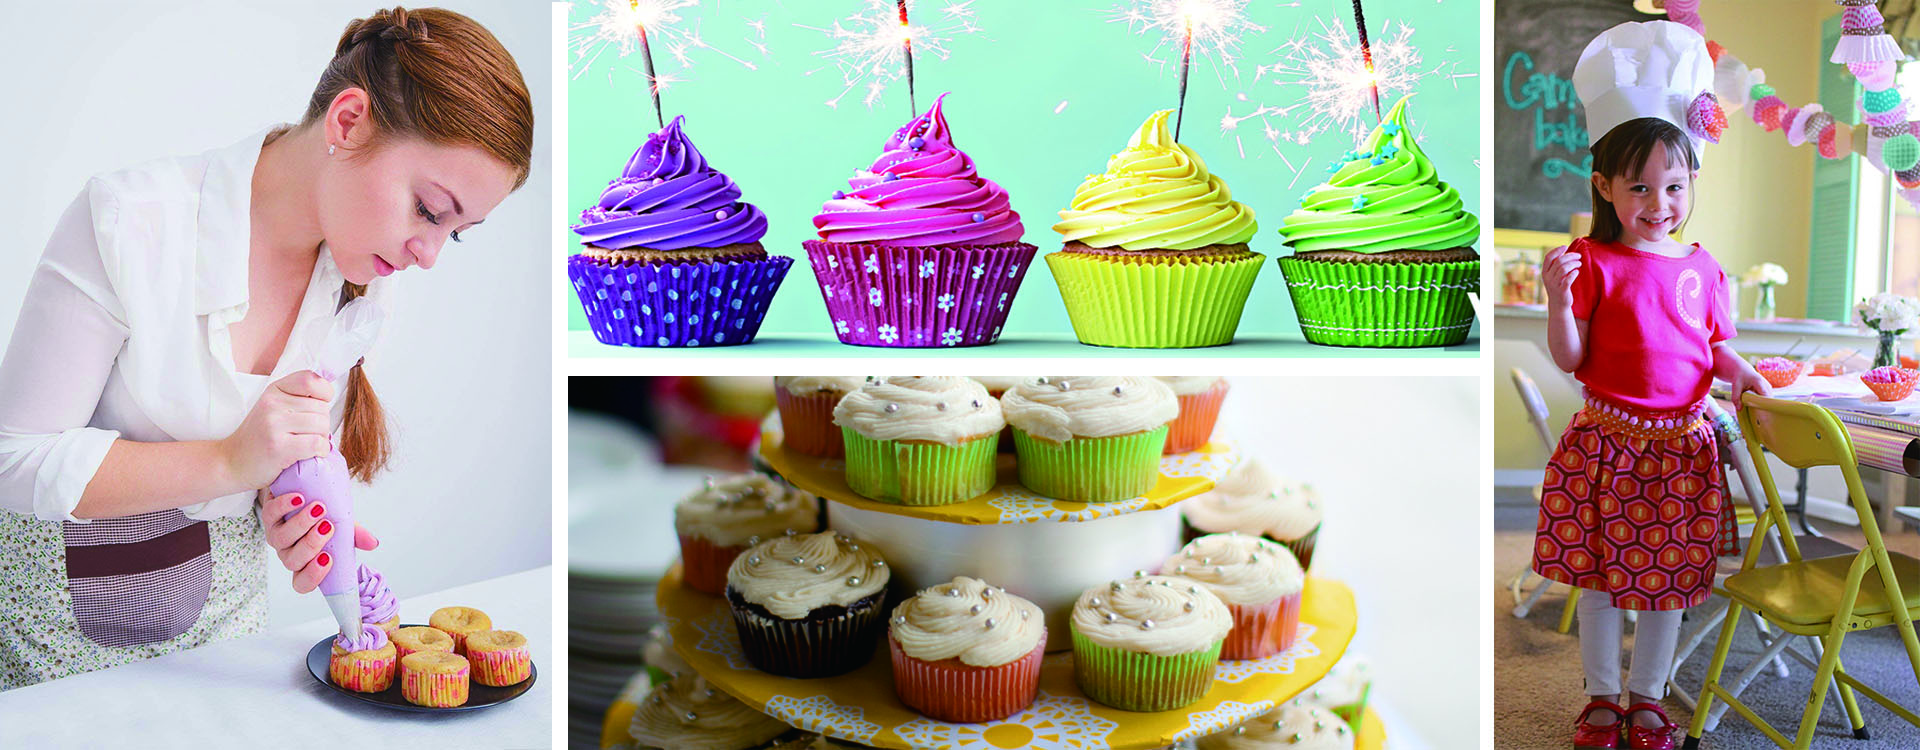 Home party decoration colorful cupcake liners